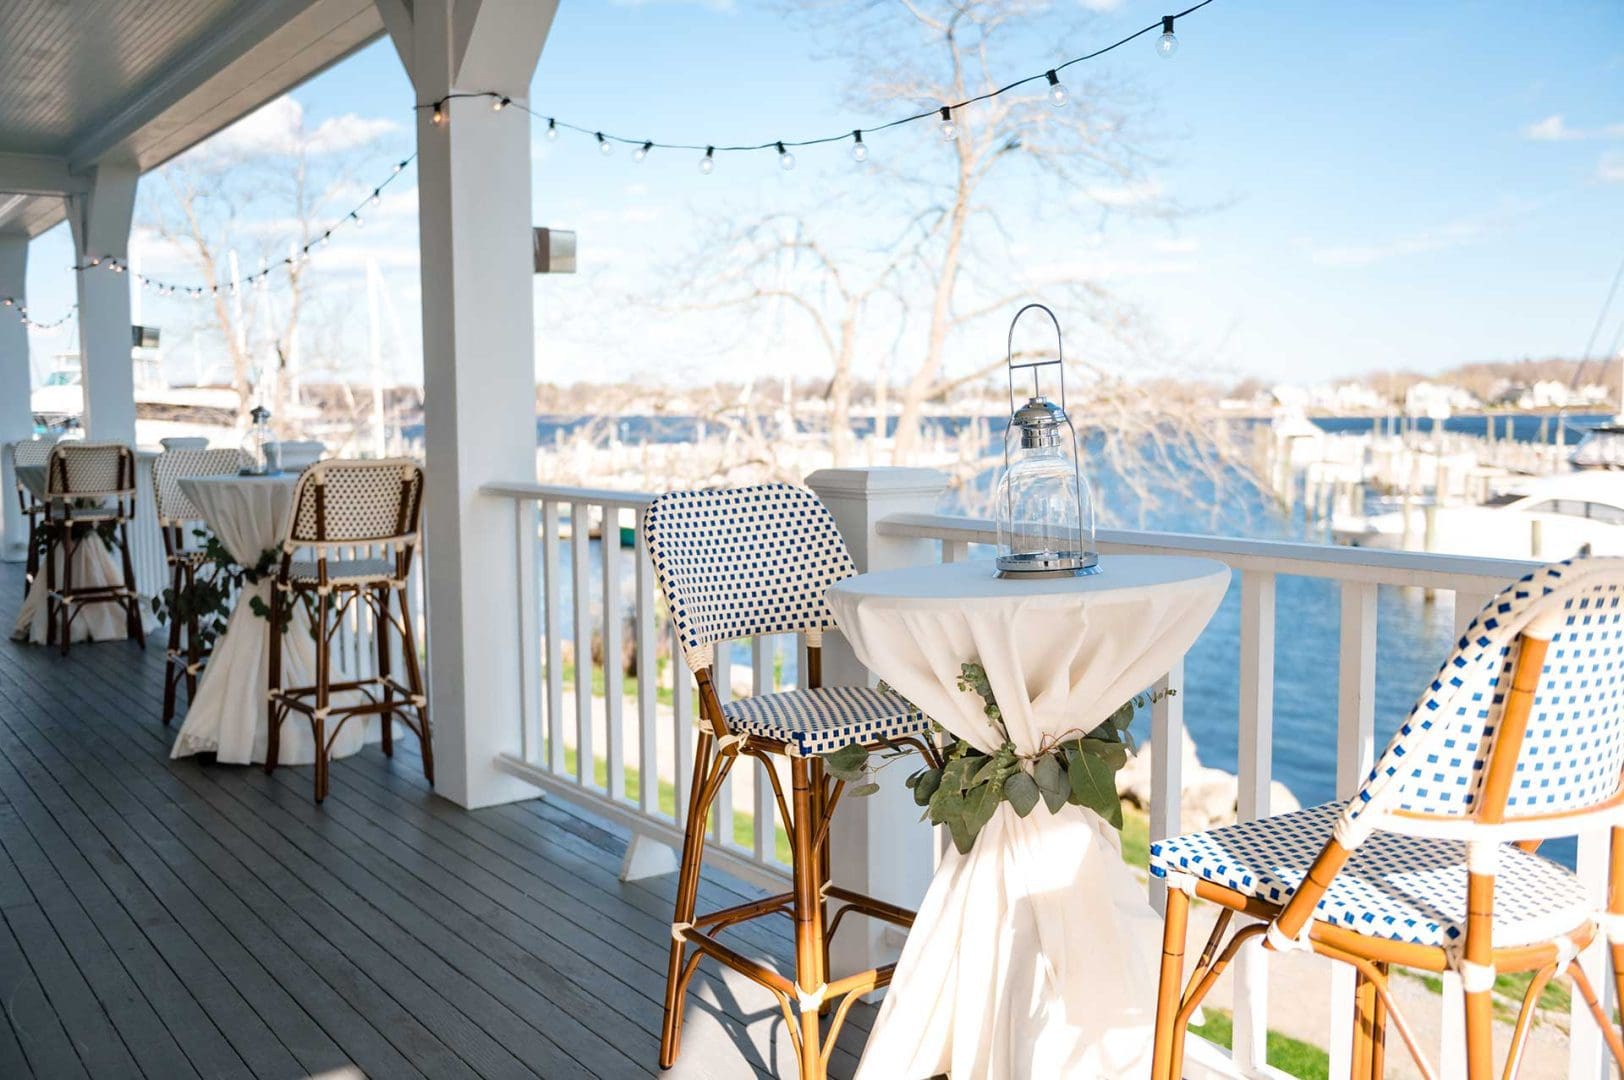 Shot of cocktail tables on porch overlooking water